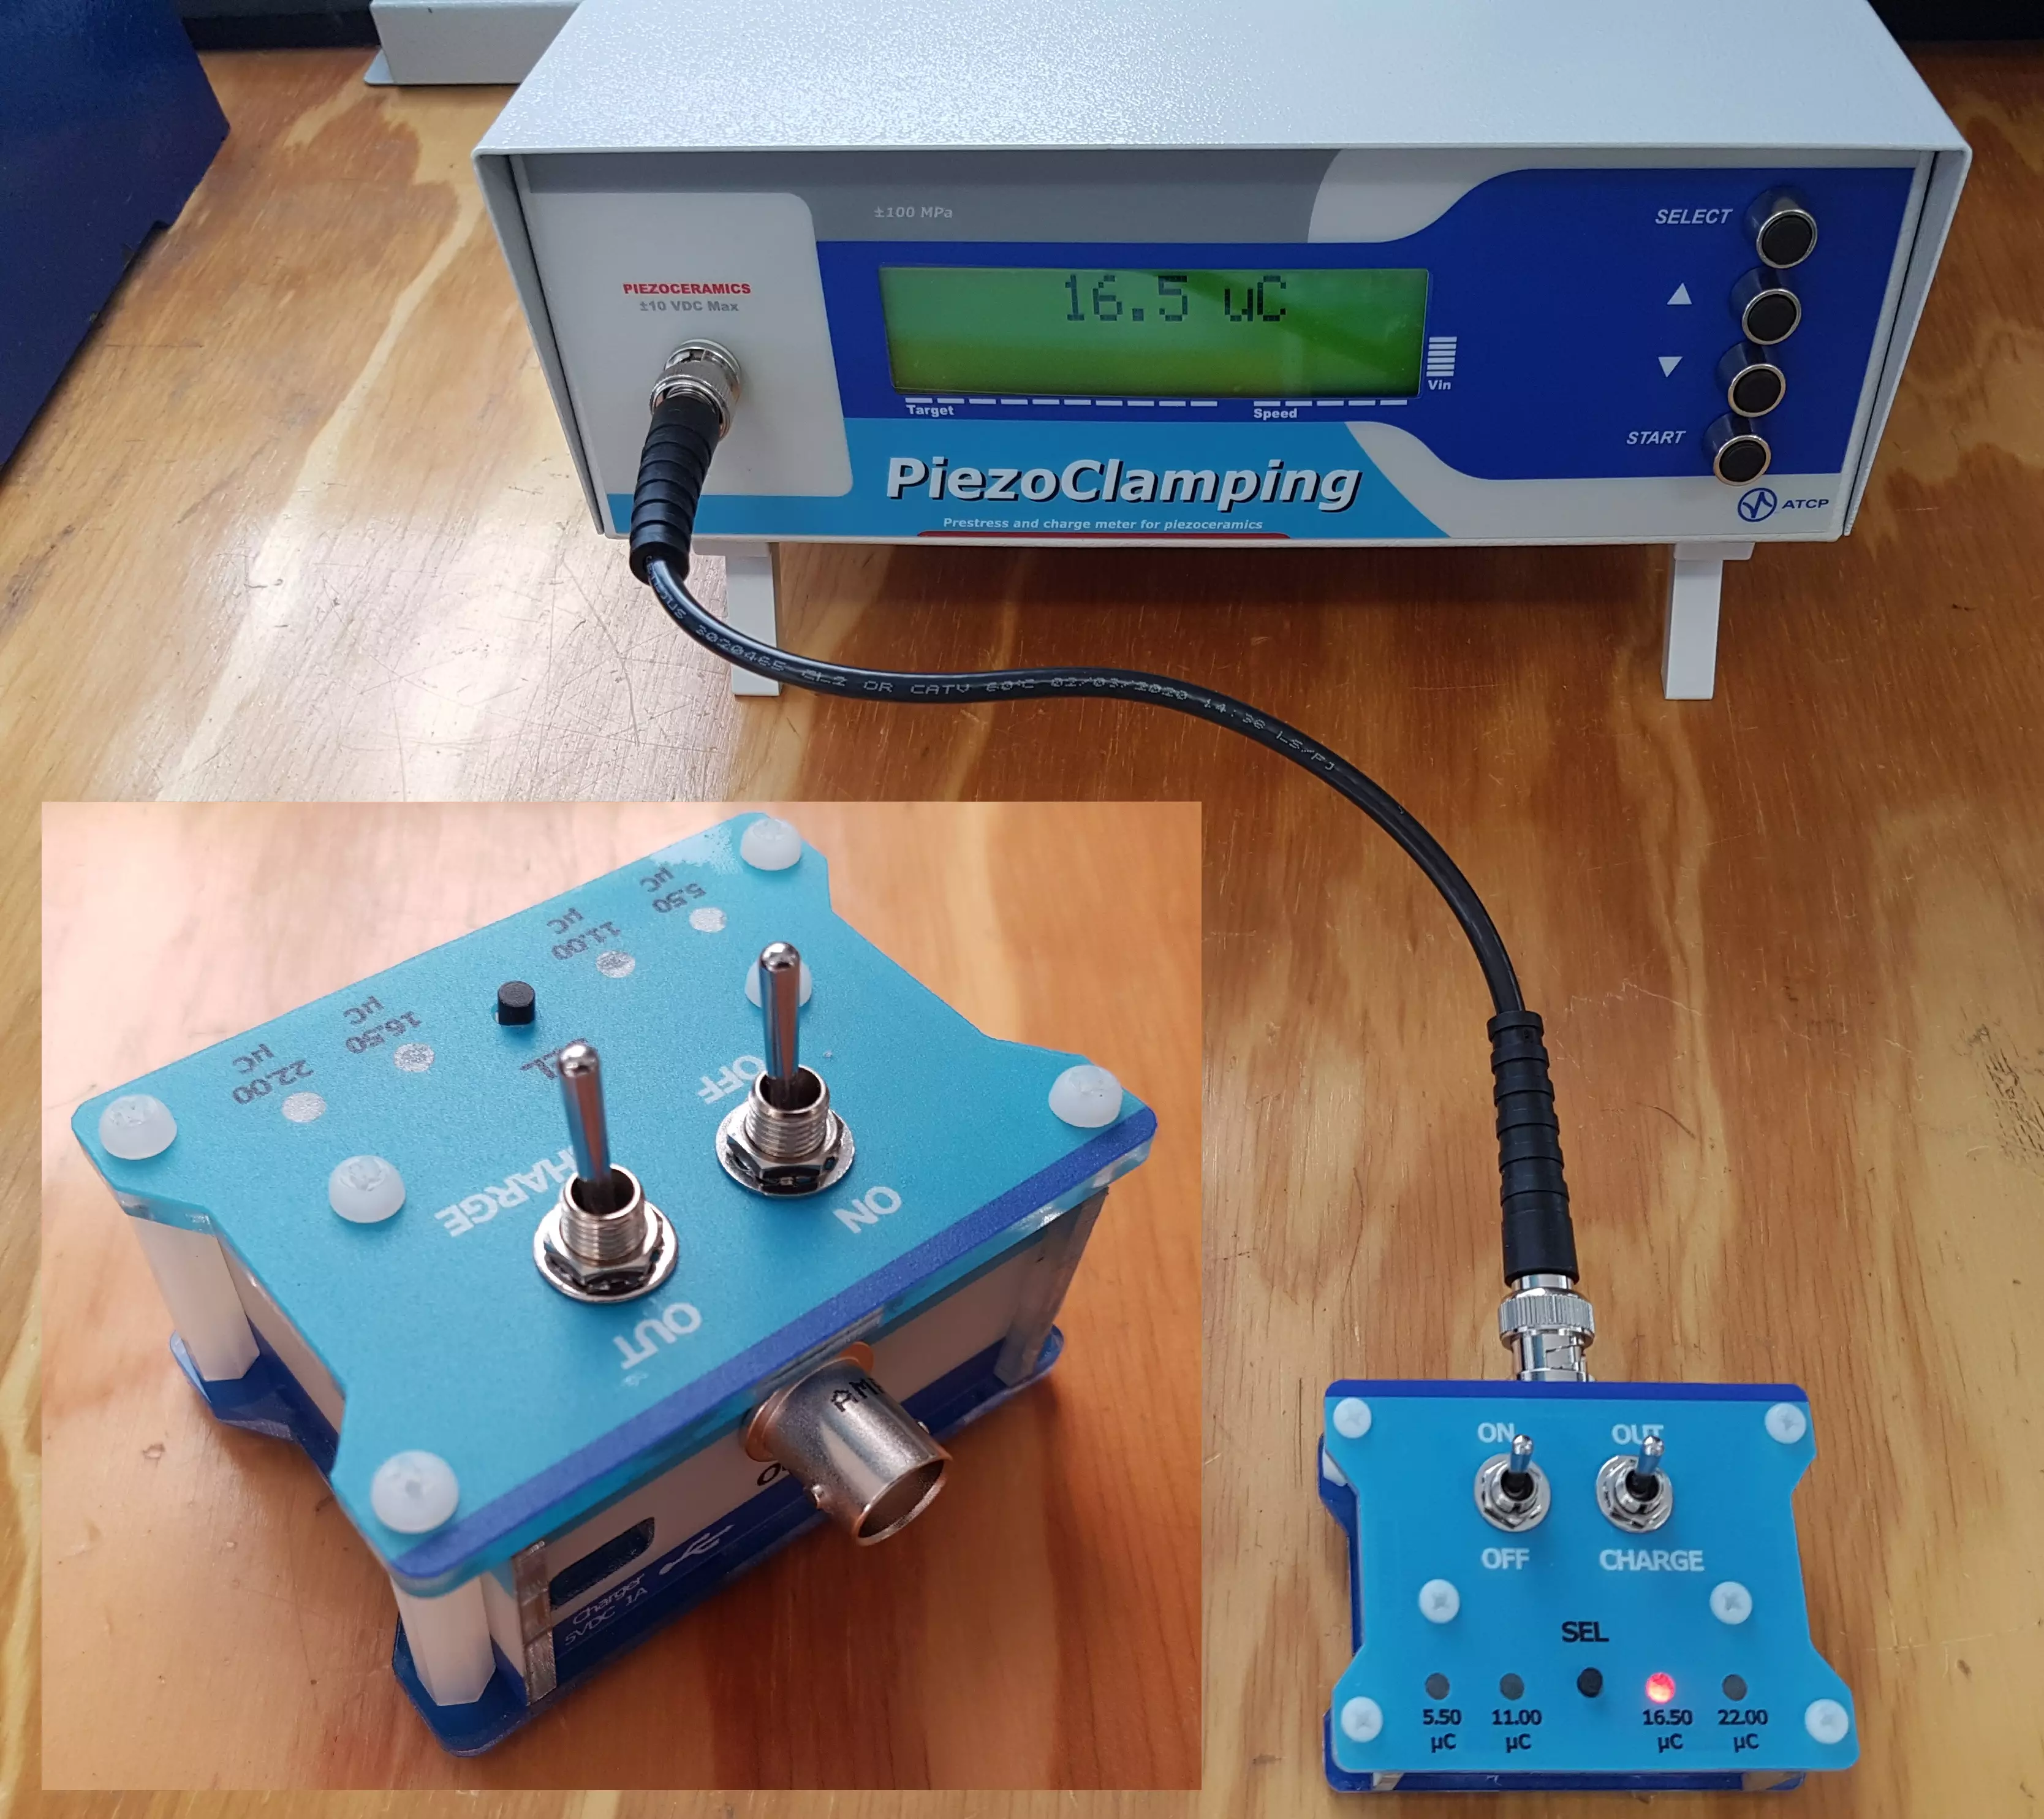 Functional test and calibration of a PiezoClamping using the calibration kit.